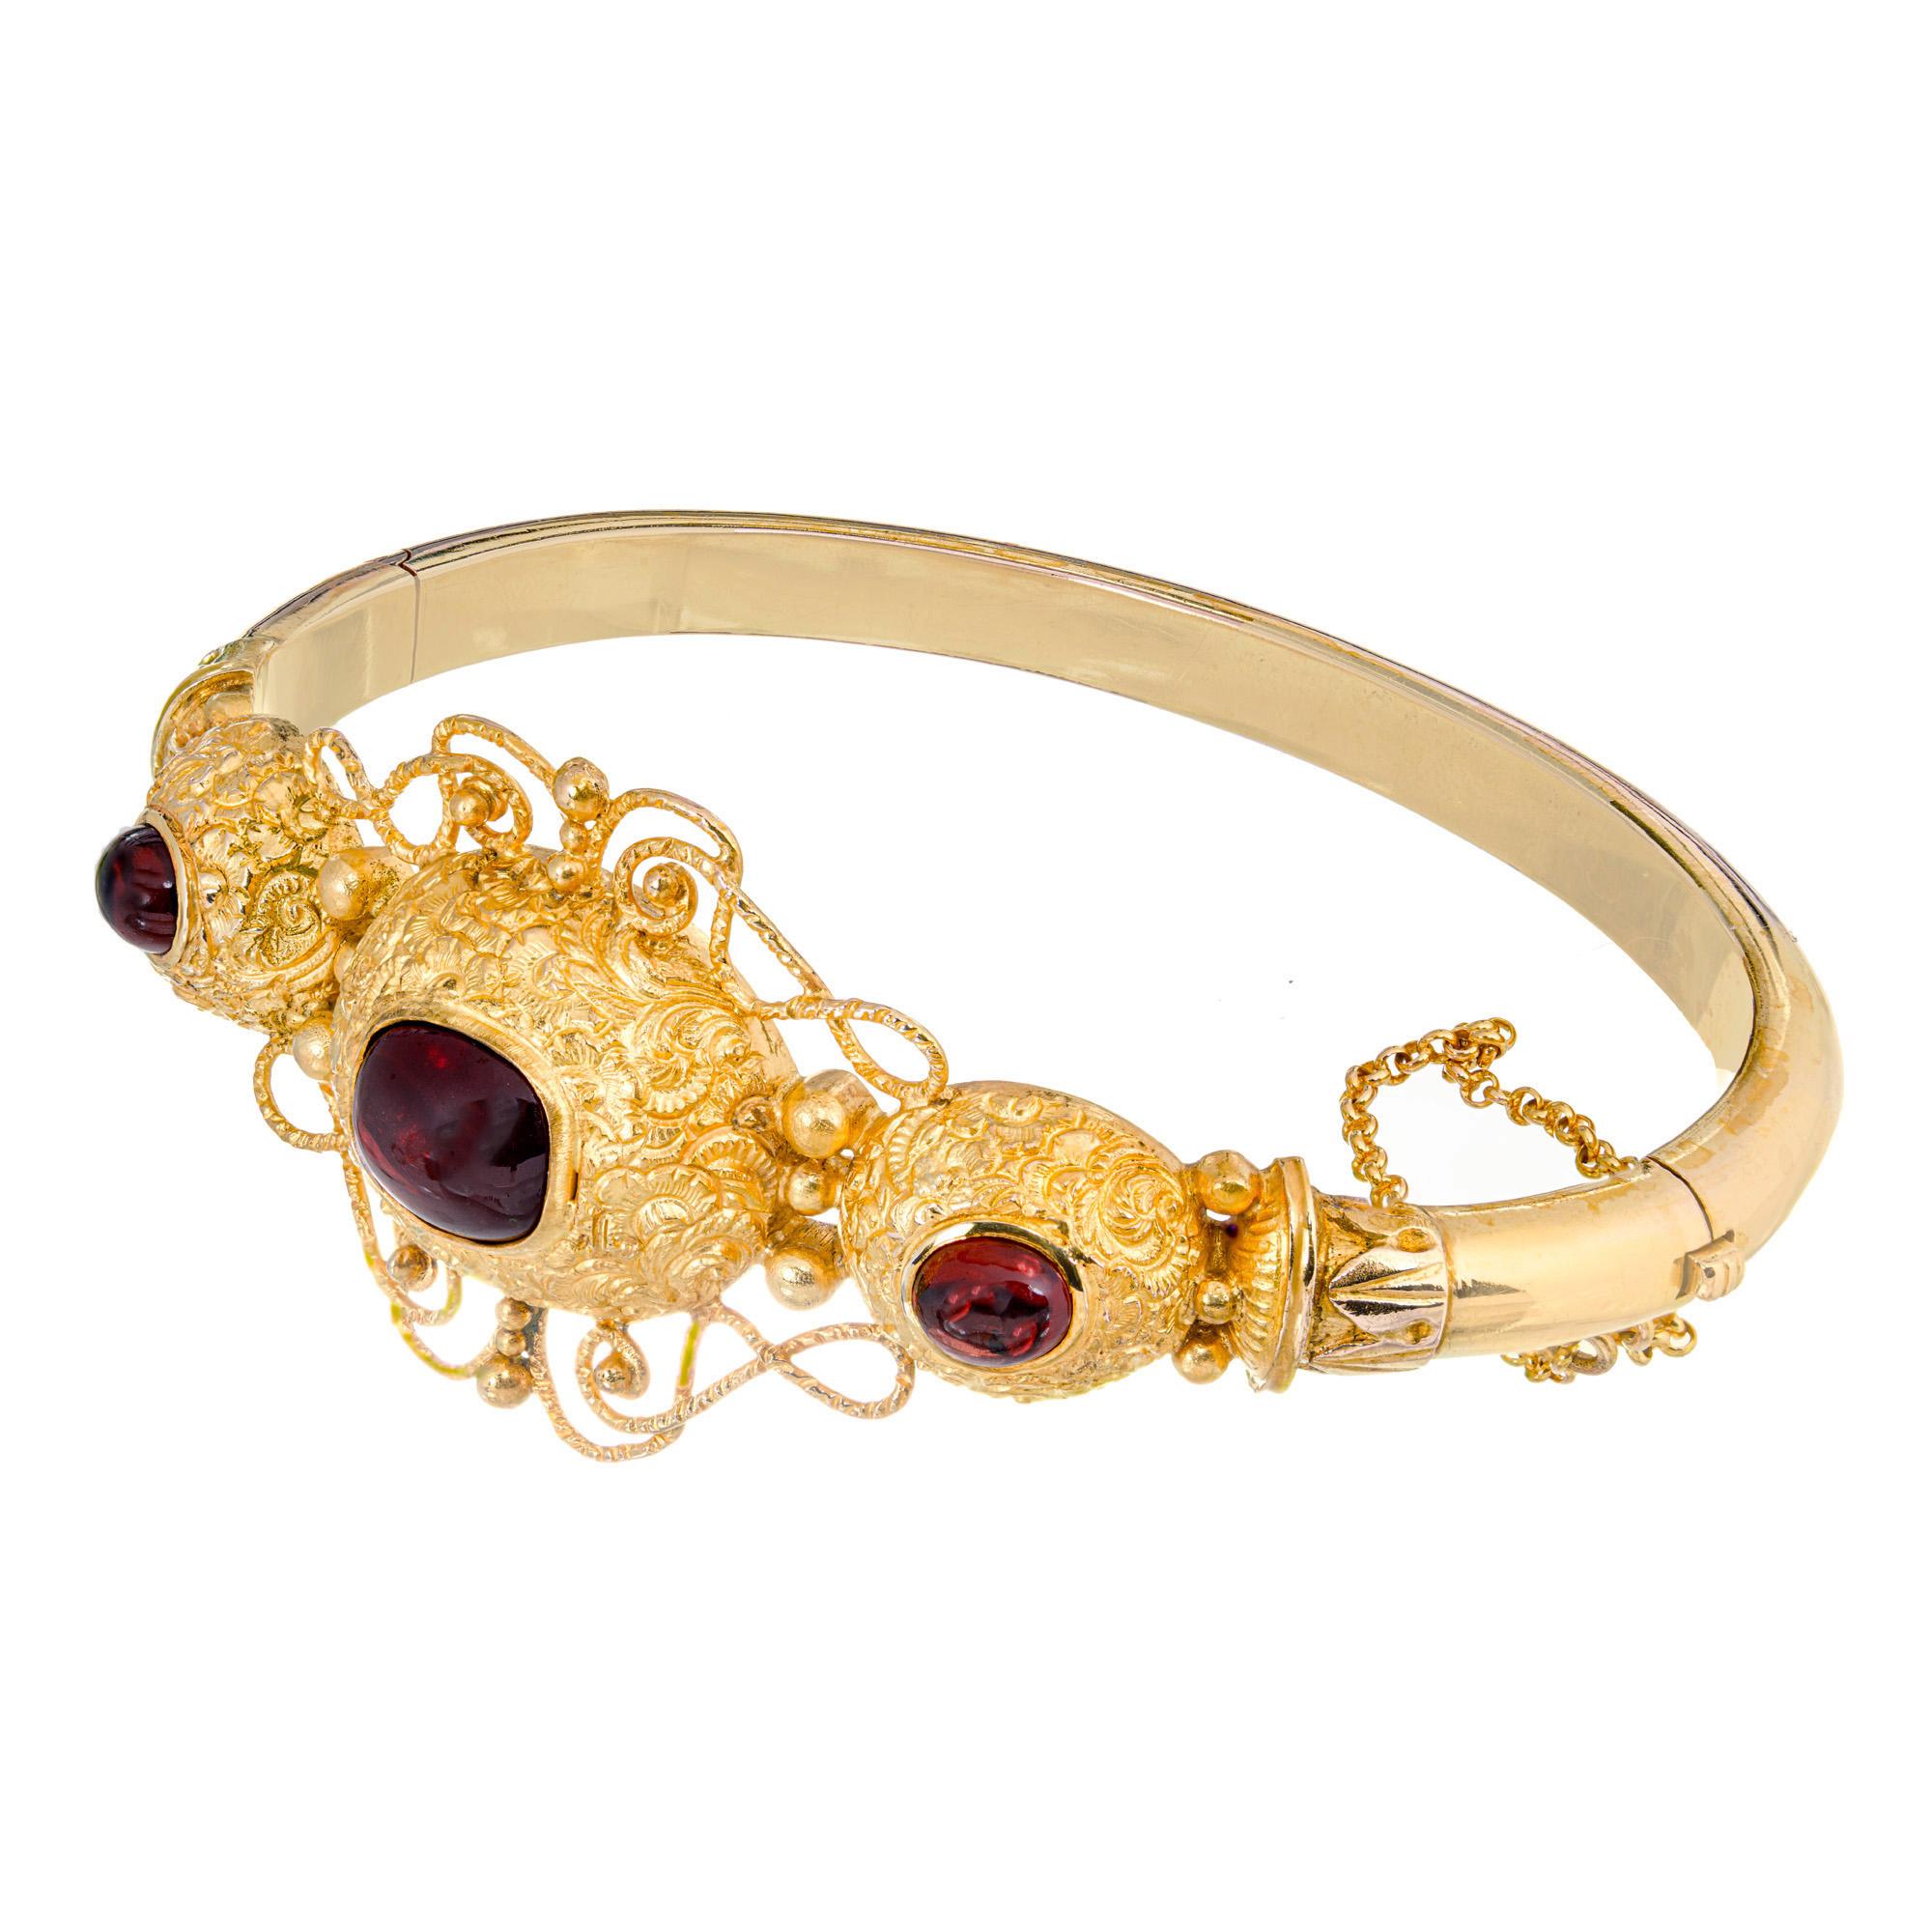 Unique Victorian 1850's wonderful bangle bracelet. Set with 3 oval cabochon garnets set in a 14k yellow gold setting. Handmade, beautifully crafted with natural patina. There is also a Safety chain added later. Fits up to  7.5 inch wrist. 

1